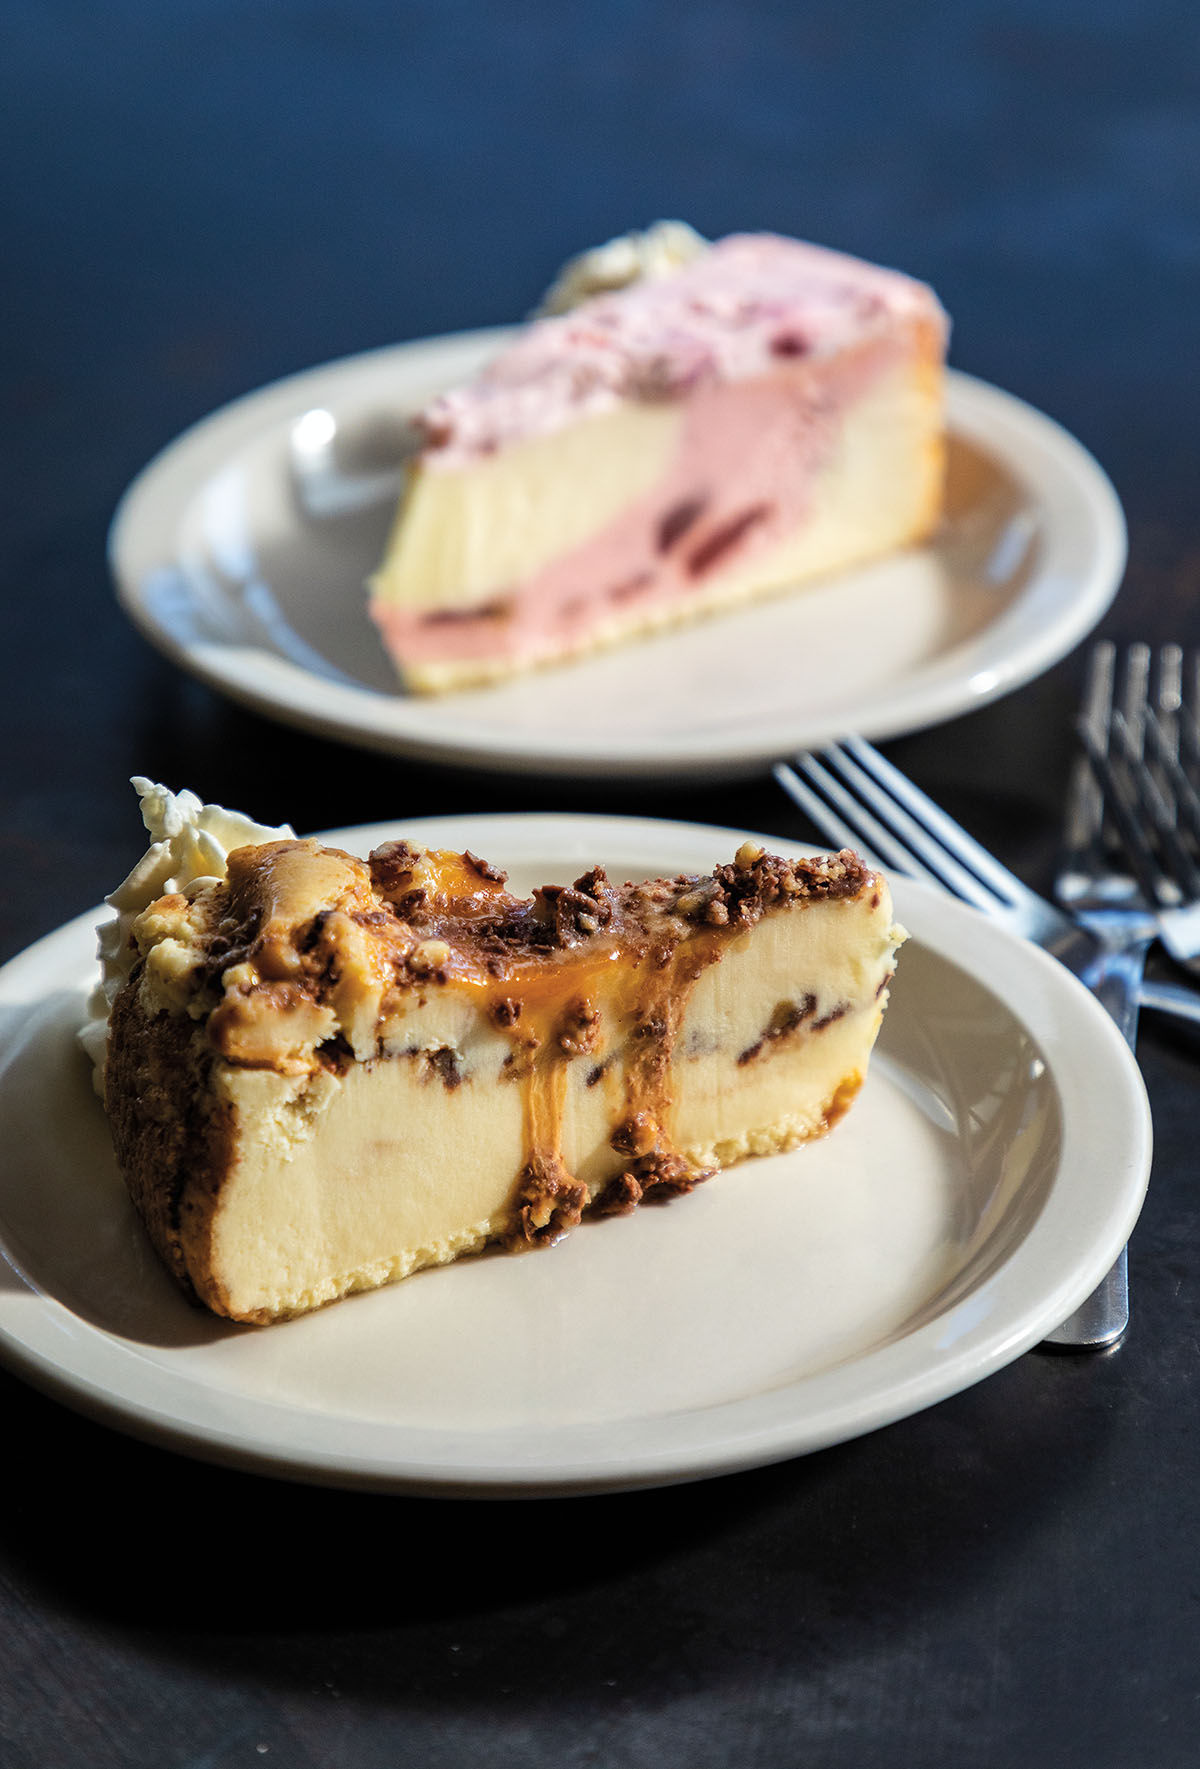 In the background, a piece of cheesecake with pink swirls and fruits. In front, a cheesecake with a caramel, nut and chocolate topping